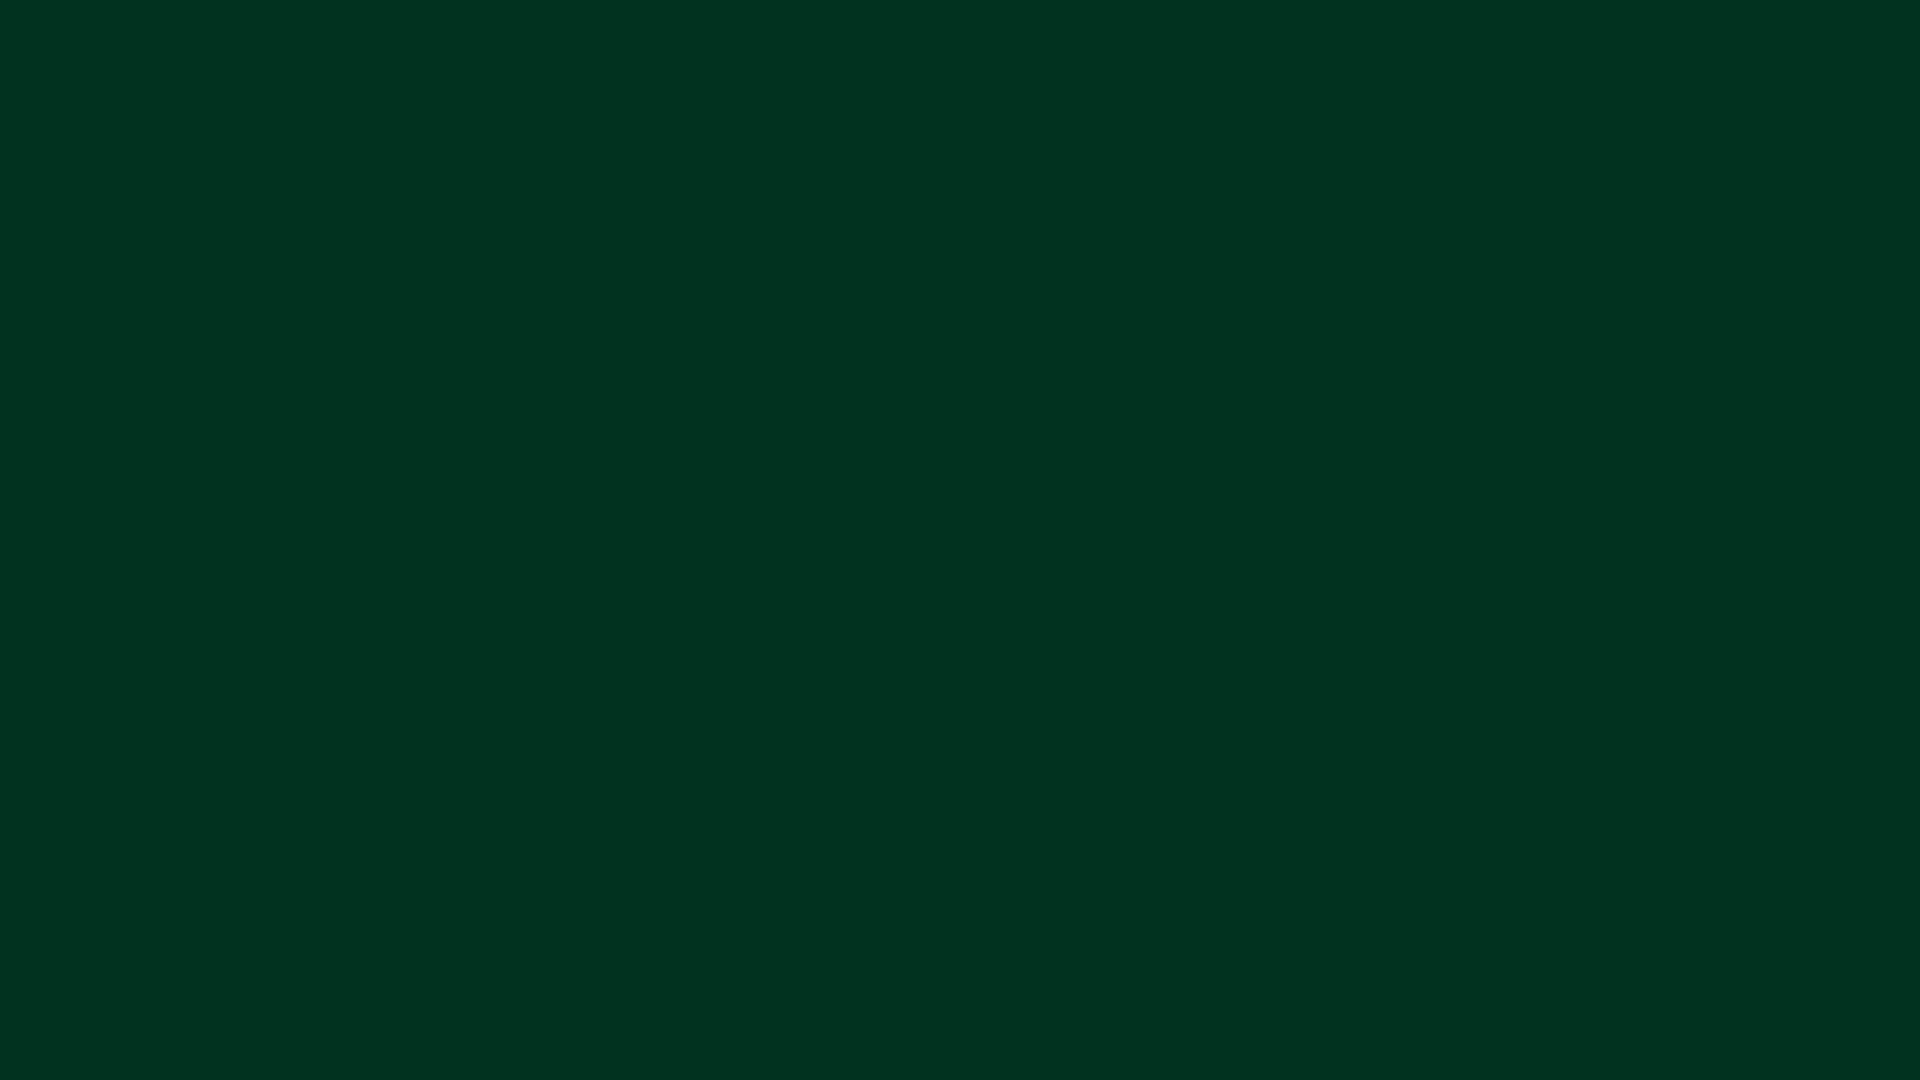 500+ Dark green background solid Images and wallpapers